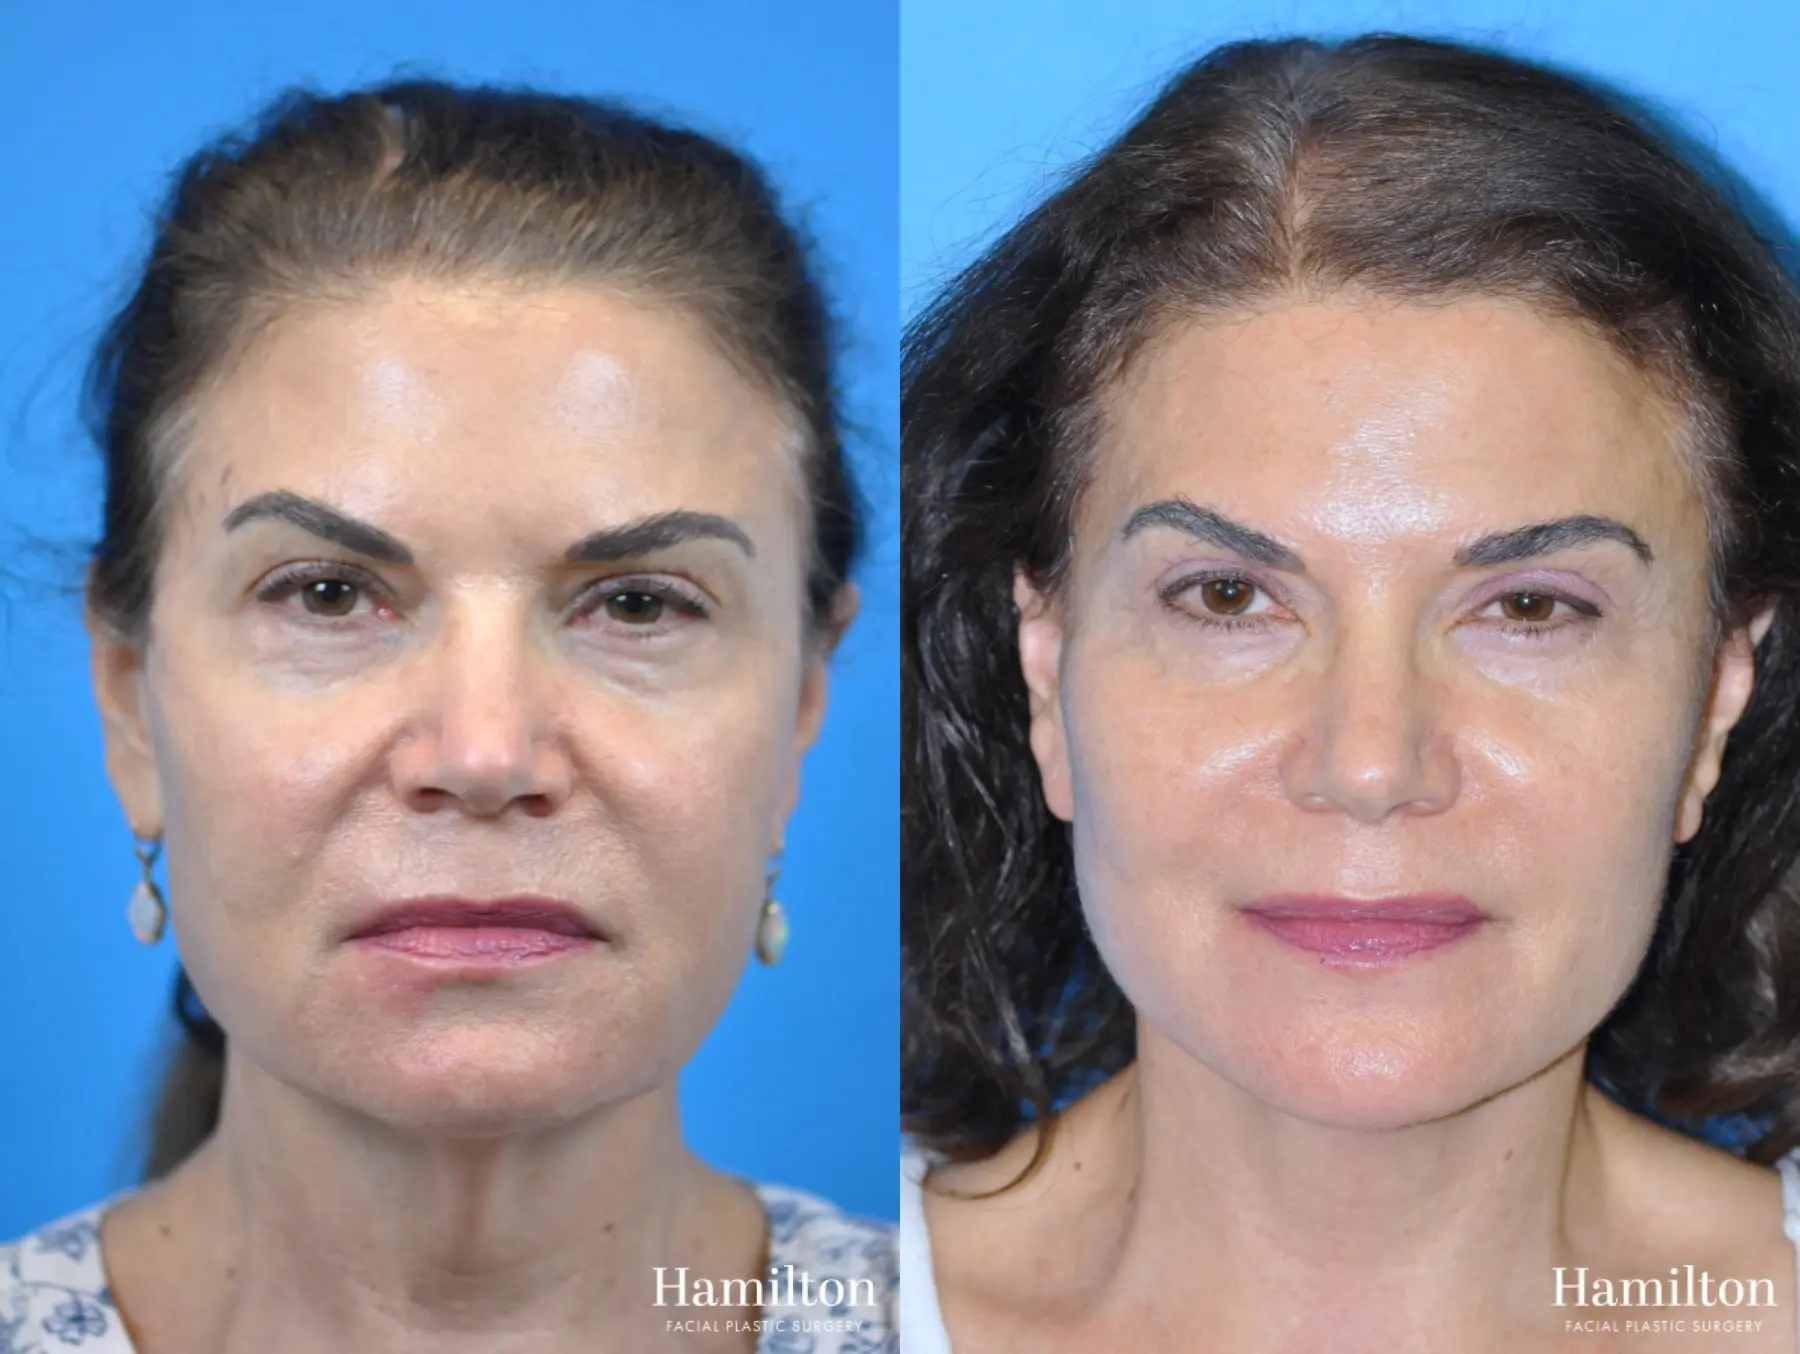 Facelift: Patient 2 - Before and After 2